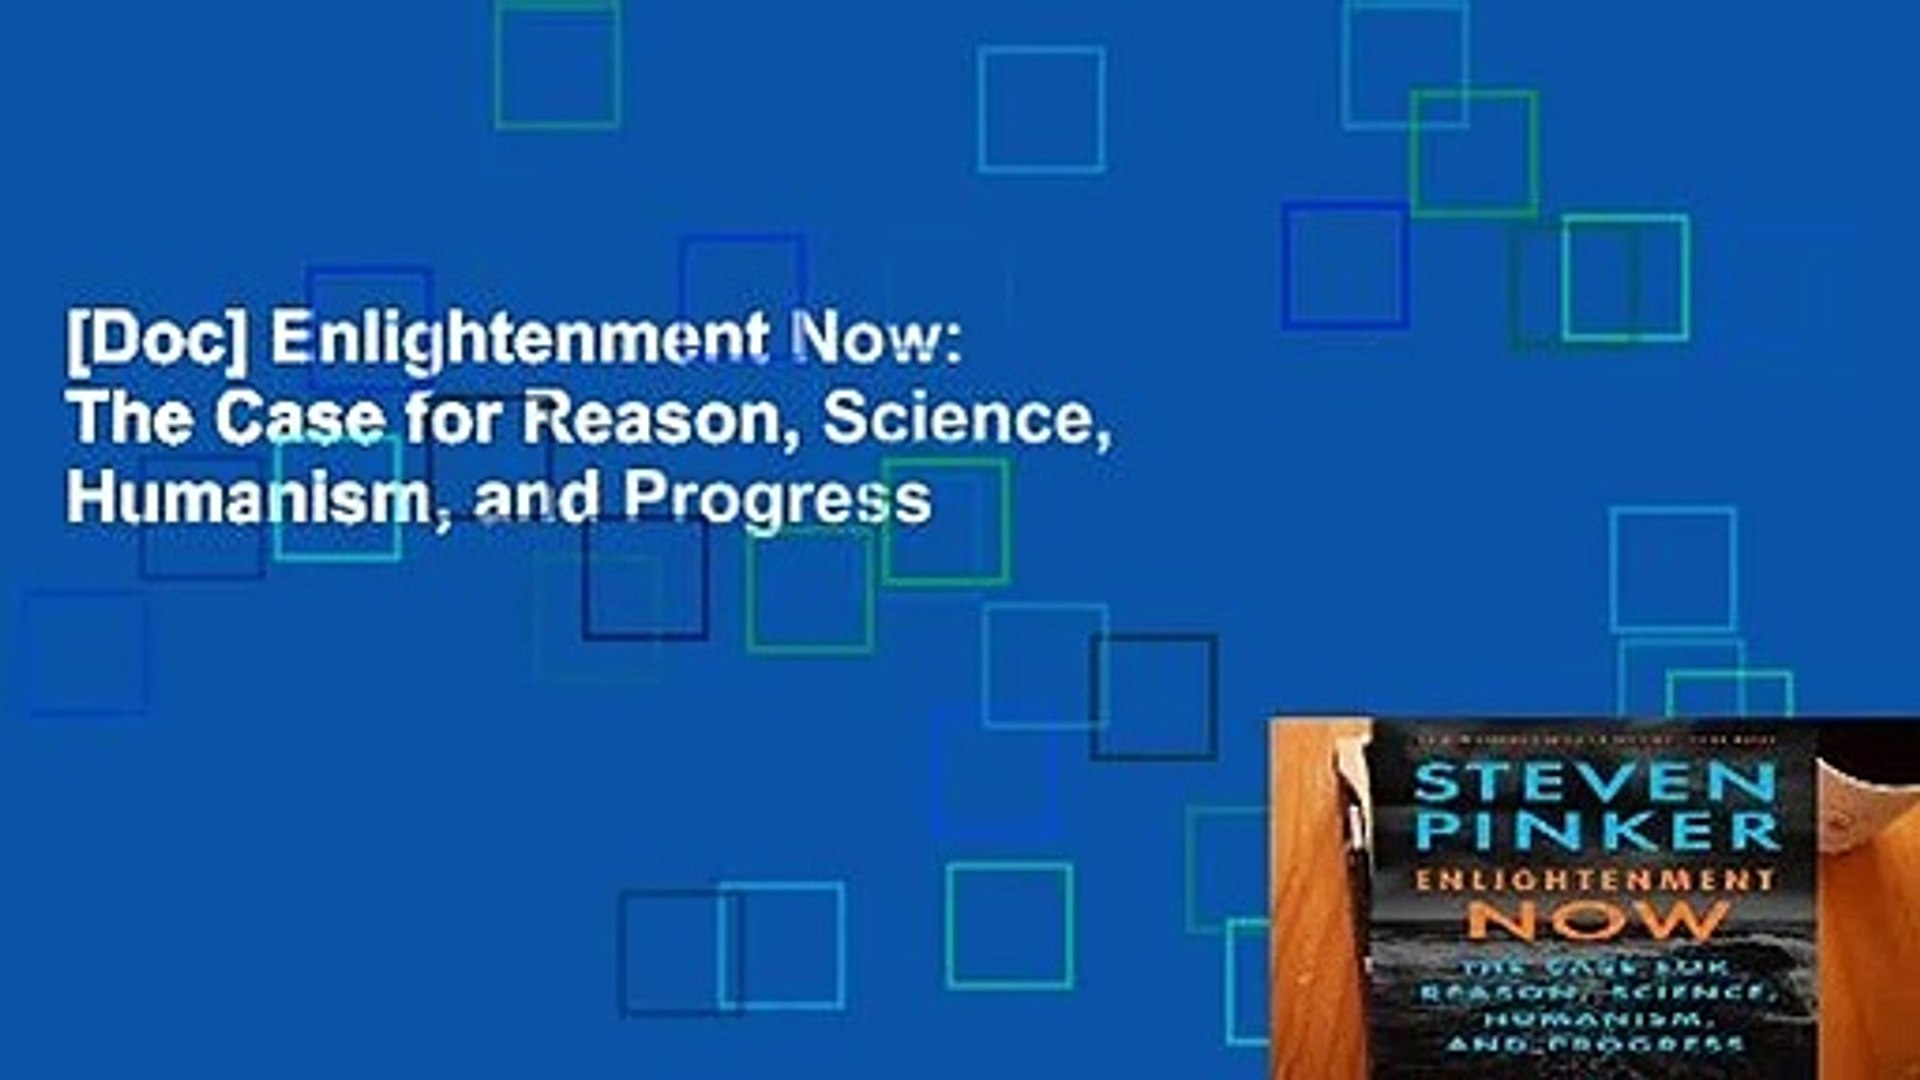 Doc] Enlightenment Now: The Case for Reason, Science, Humanism, and Progress  - video Dailymotion